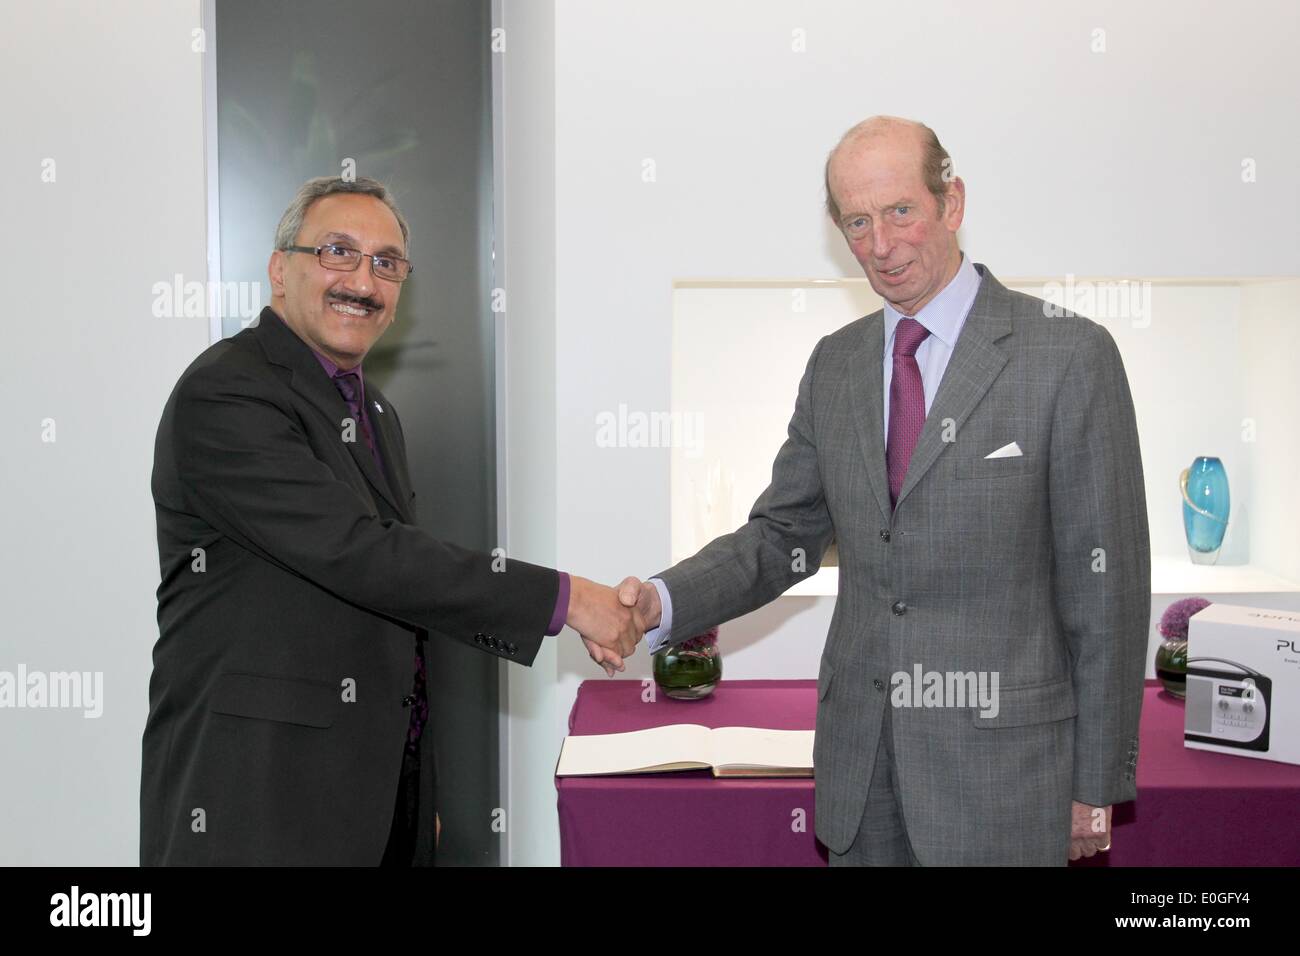 Kings Langley, Hertfordshire, UK. 13th May 2014. HRH Prince Edward, Duke of Kent visits Imagination Technologies, the company behind the technology in Pure DAB Digital Radios, pictured here with Sir Hossein Yassaie, Imagination Technologies' CEO Credit:  Neville Styles/Alamy Live News Stock Photo